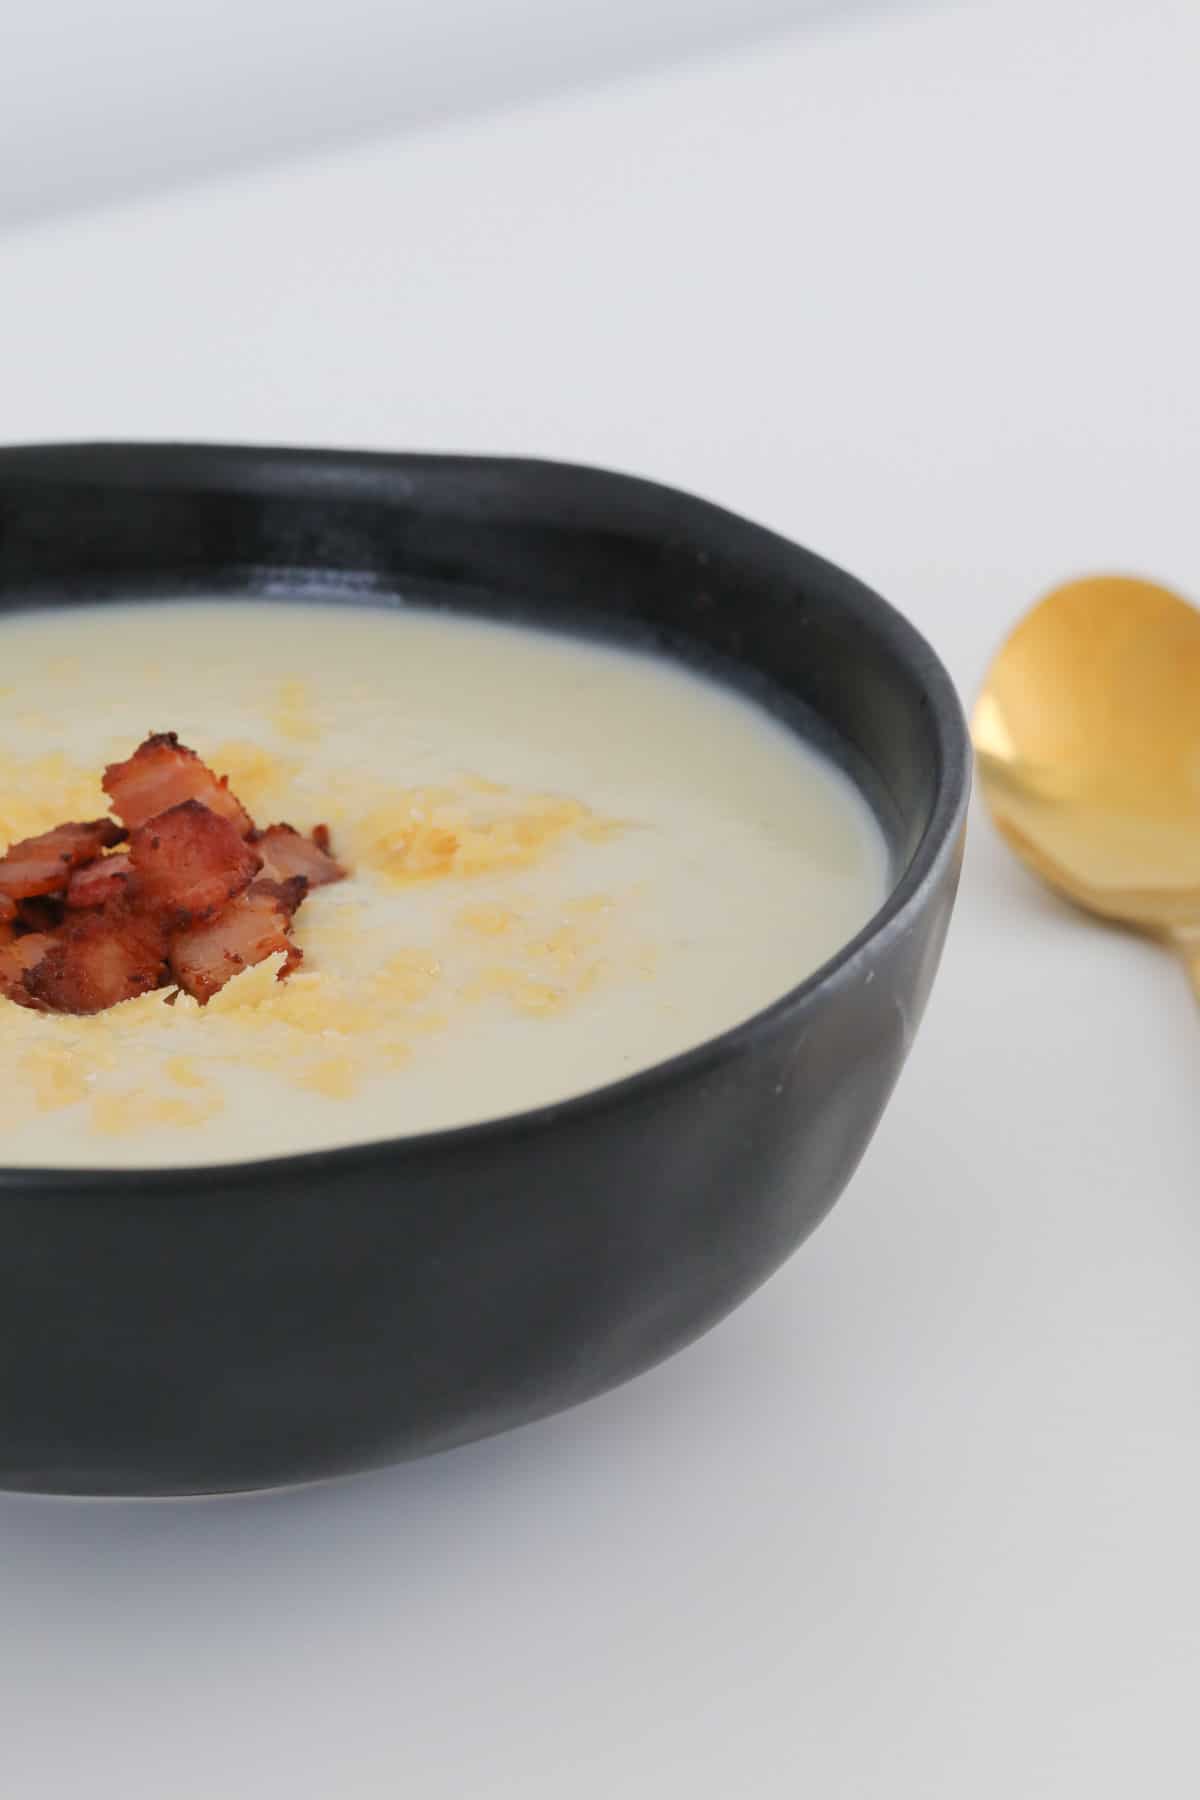 A side view of a white creamy soup with crispy bacon sprinkled on top, in a black bowl.